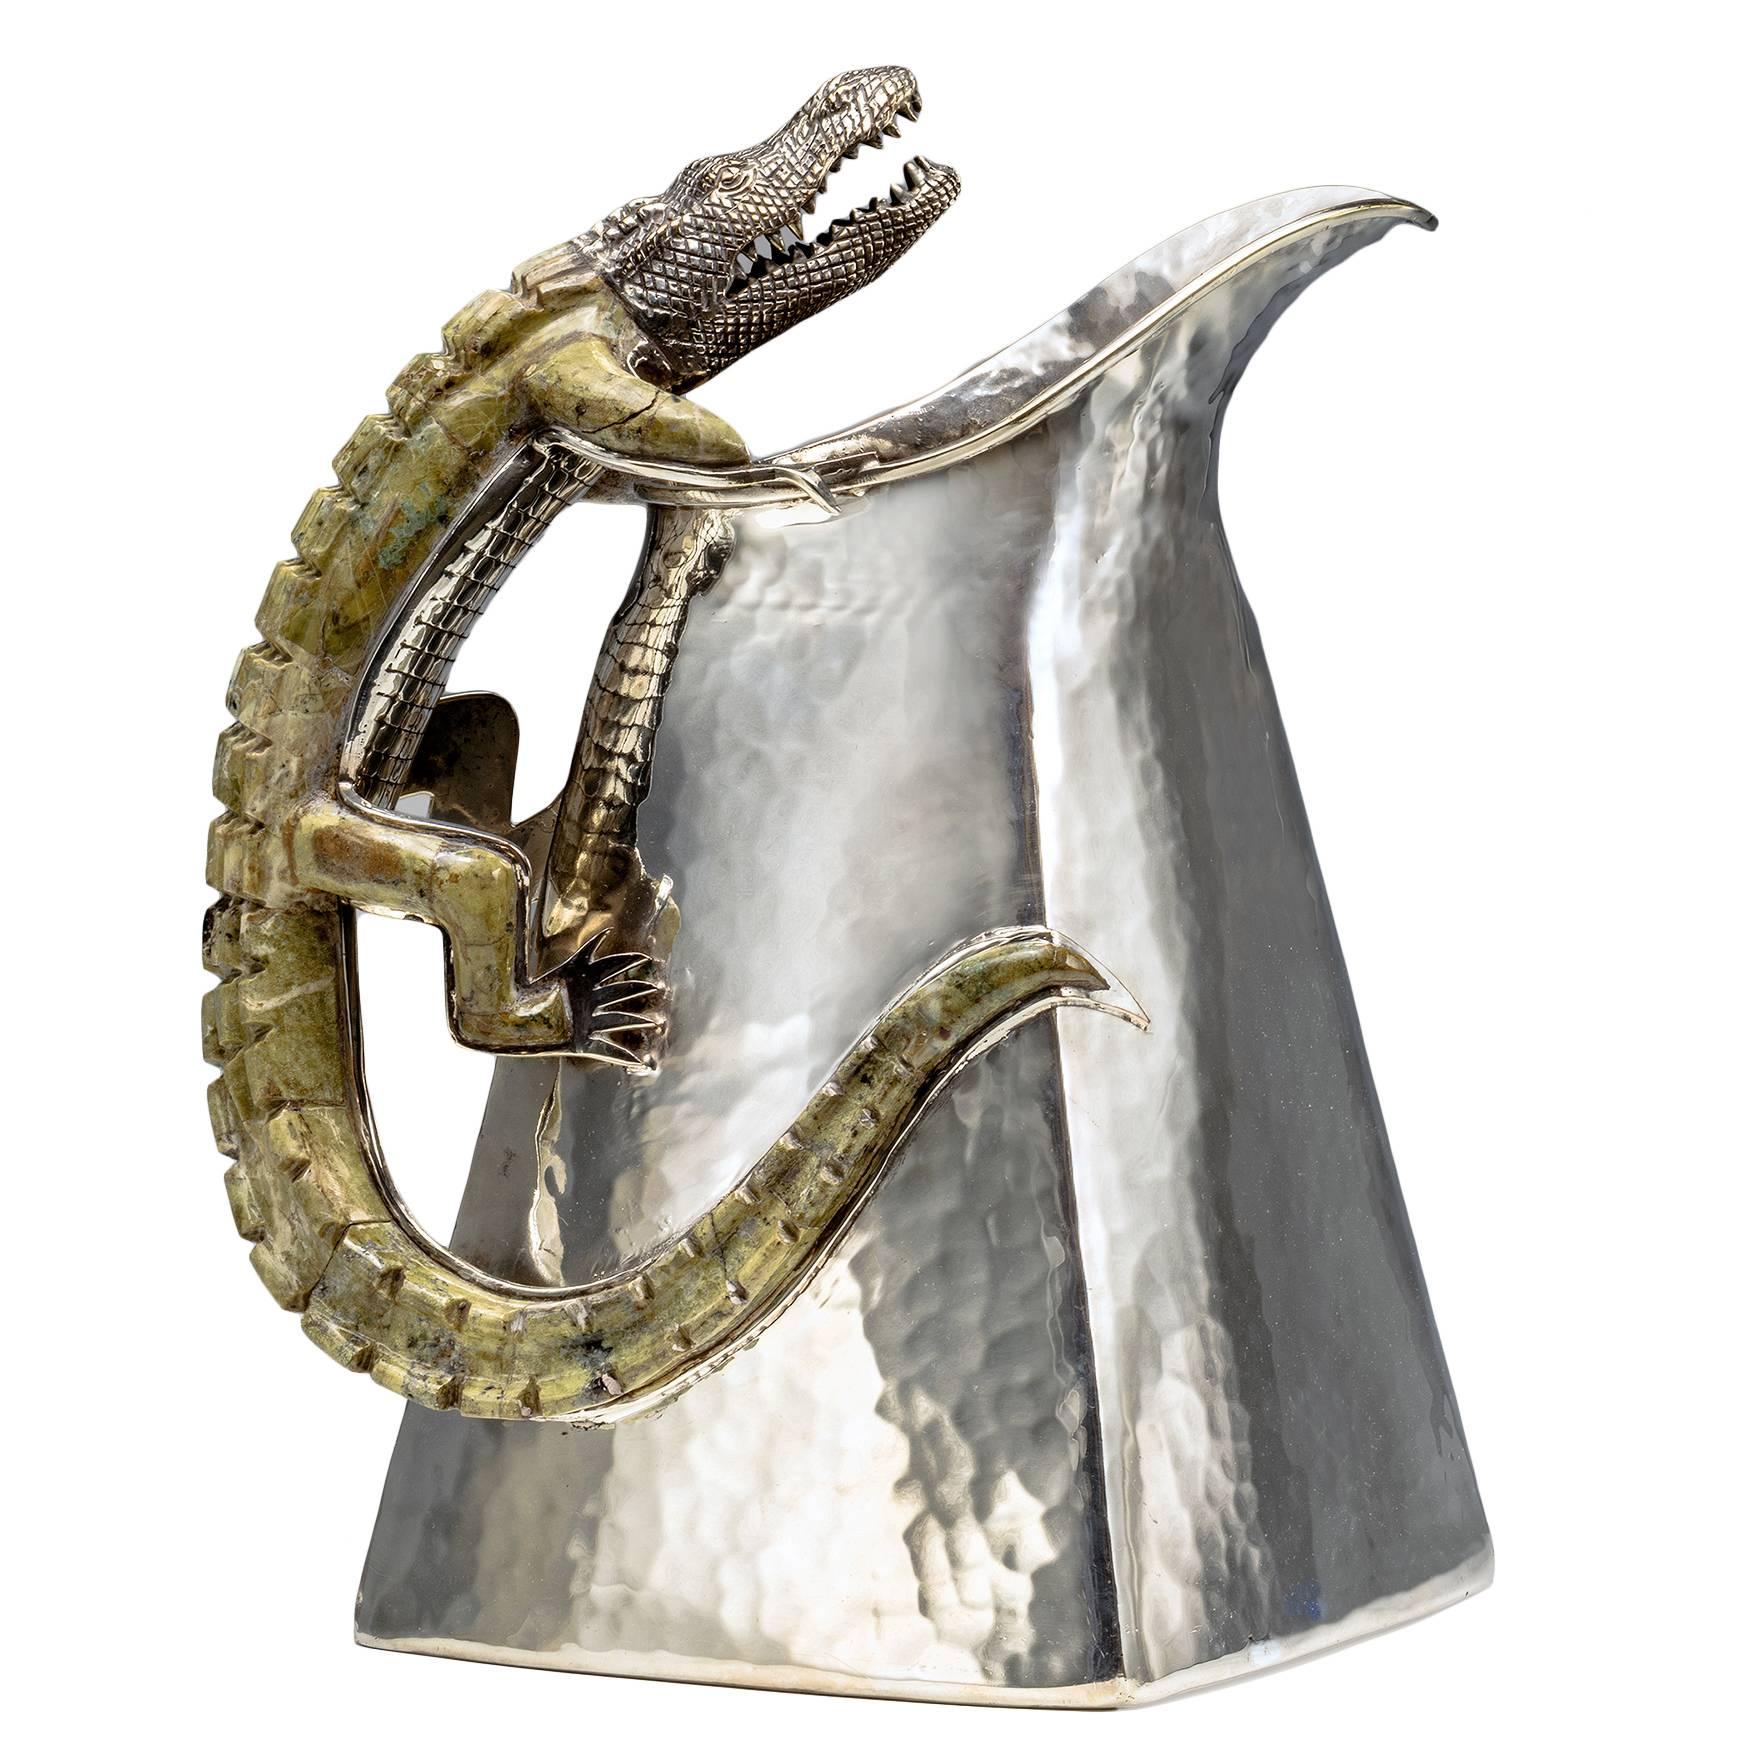 Spectacular Castillo Hand-Hammered Figural Silver Plated Pitcher